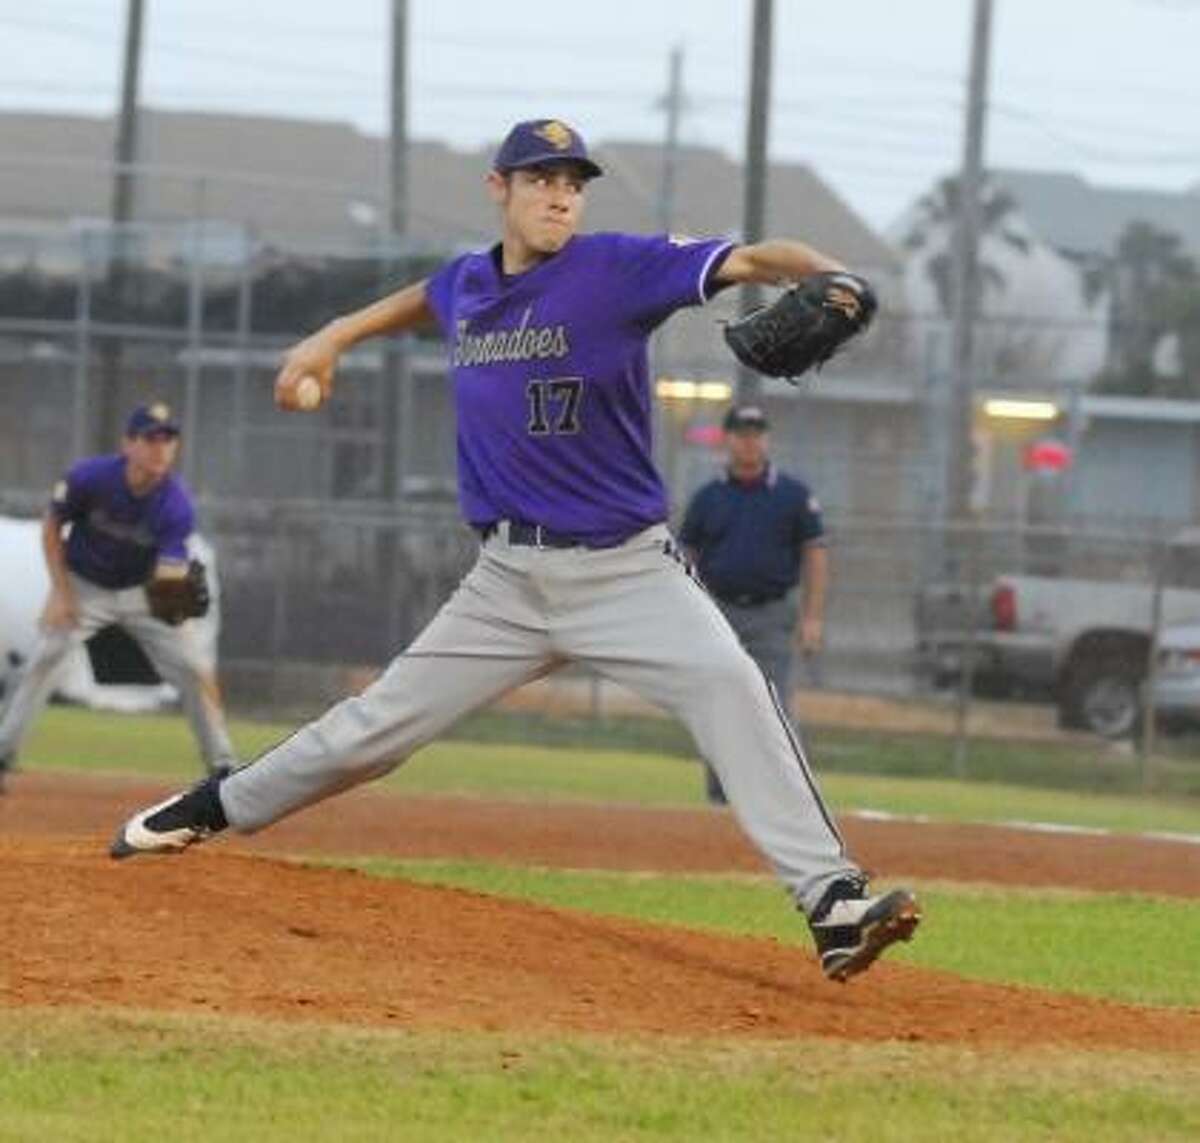 The Toronto Blue Jays selected Ball pitcher Aaron Garza in the 10th round with the 319th overall pick on Tuesday.